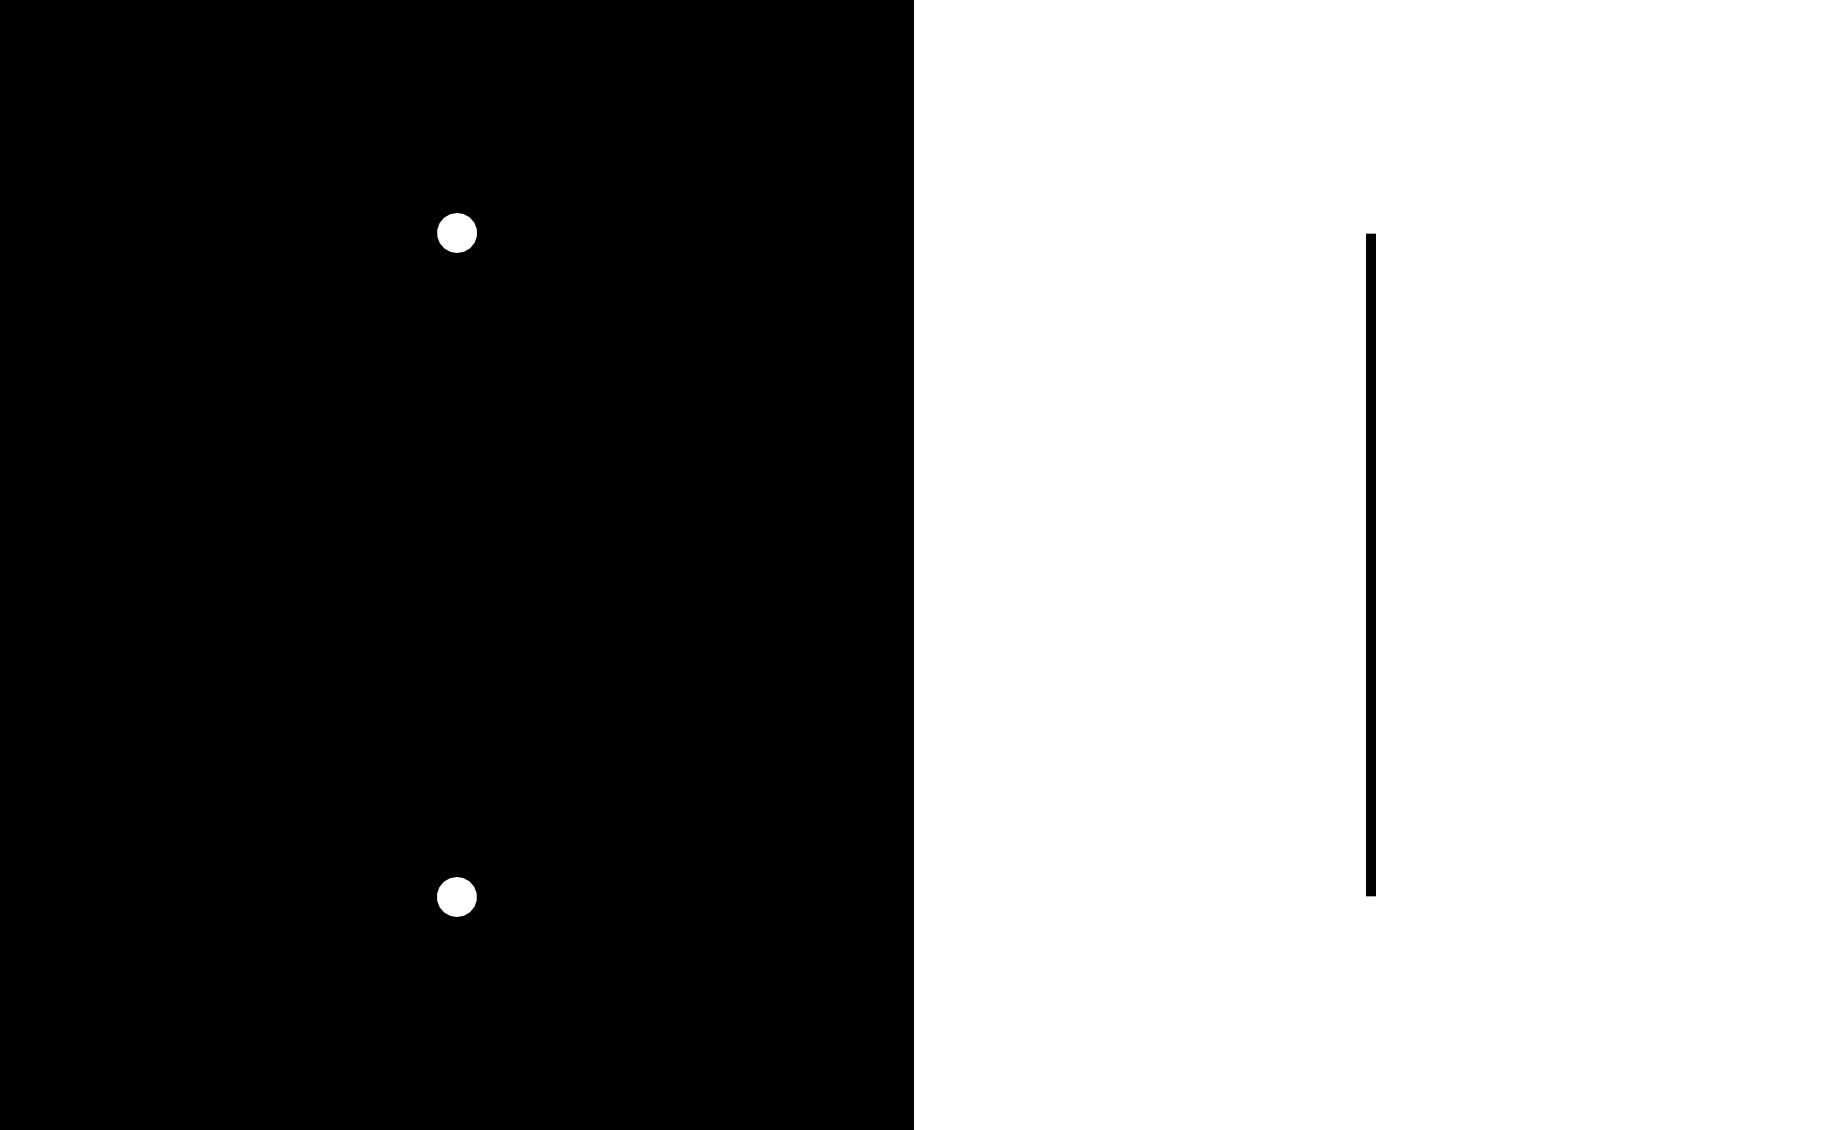 two white dots, black vertical line